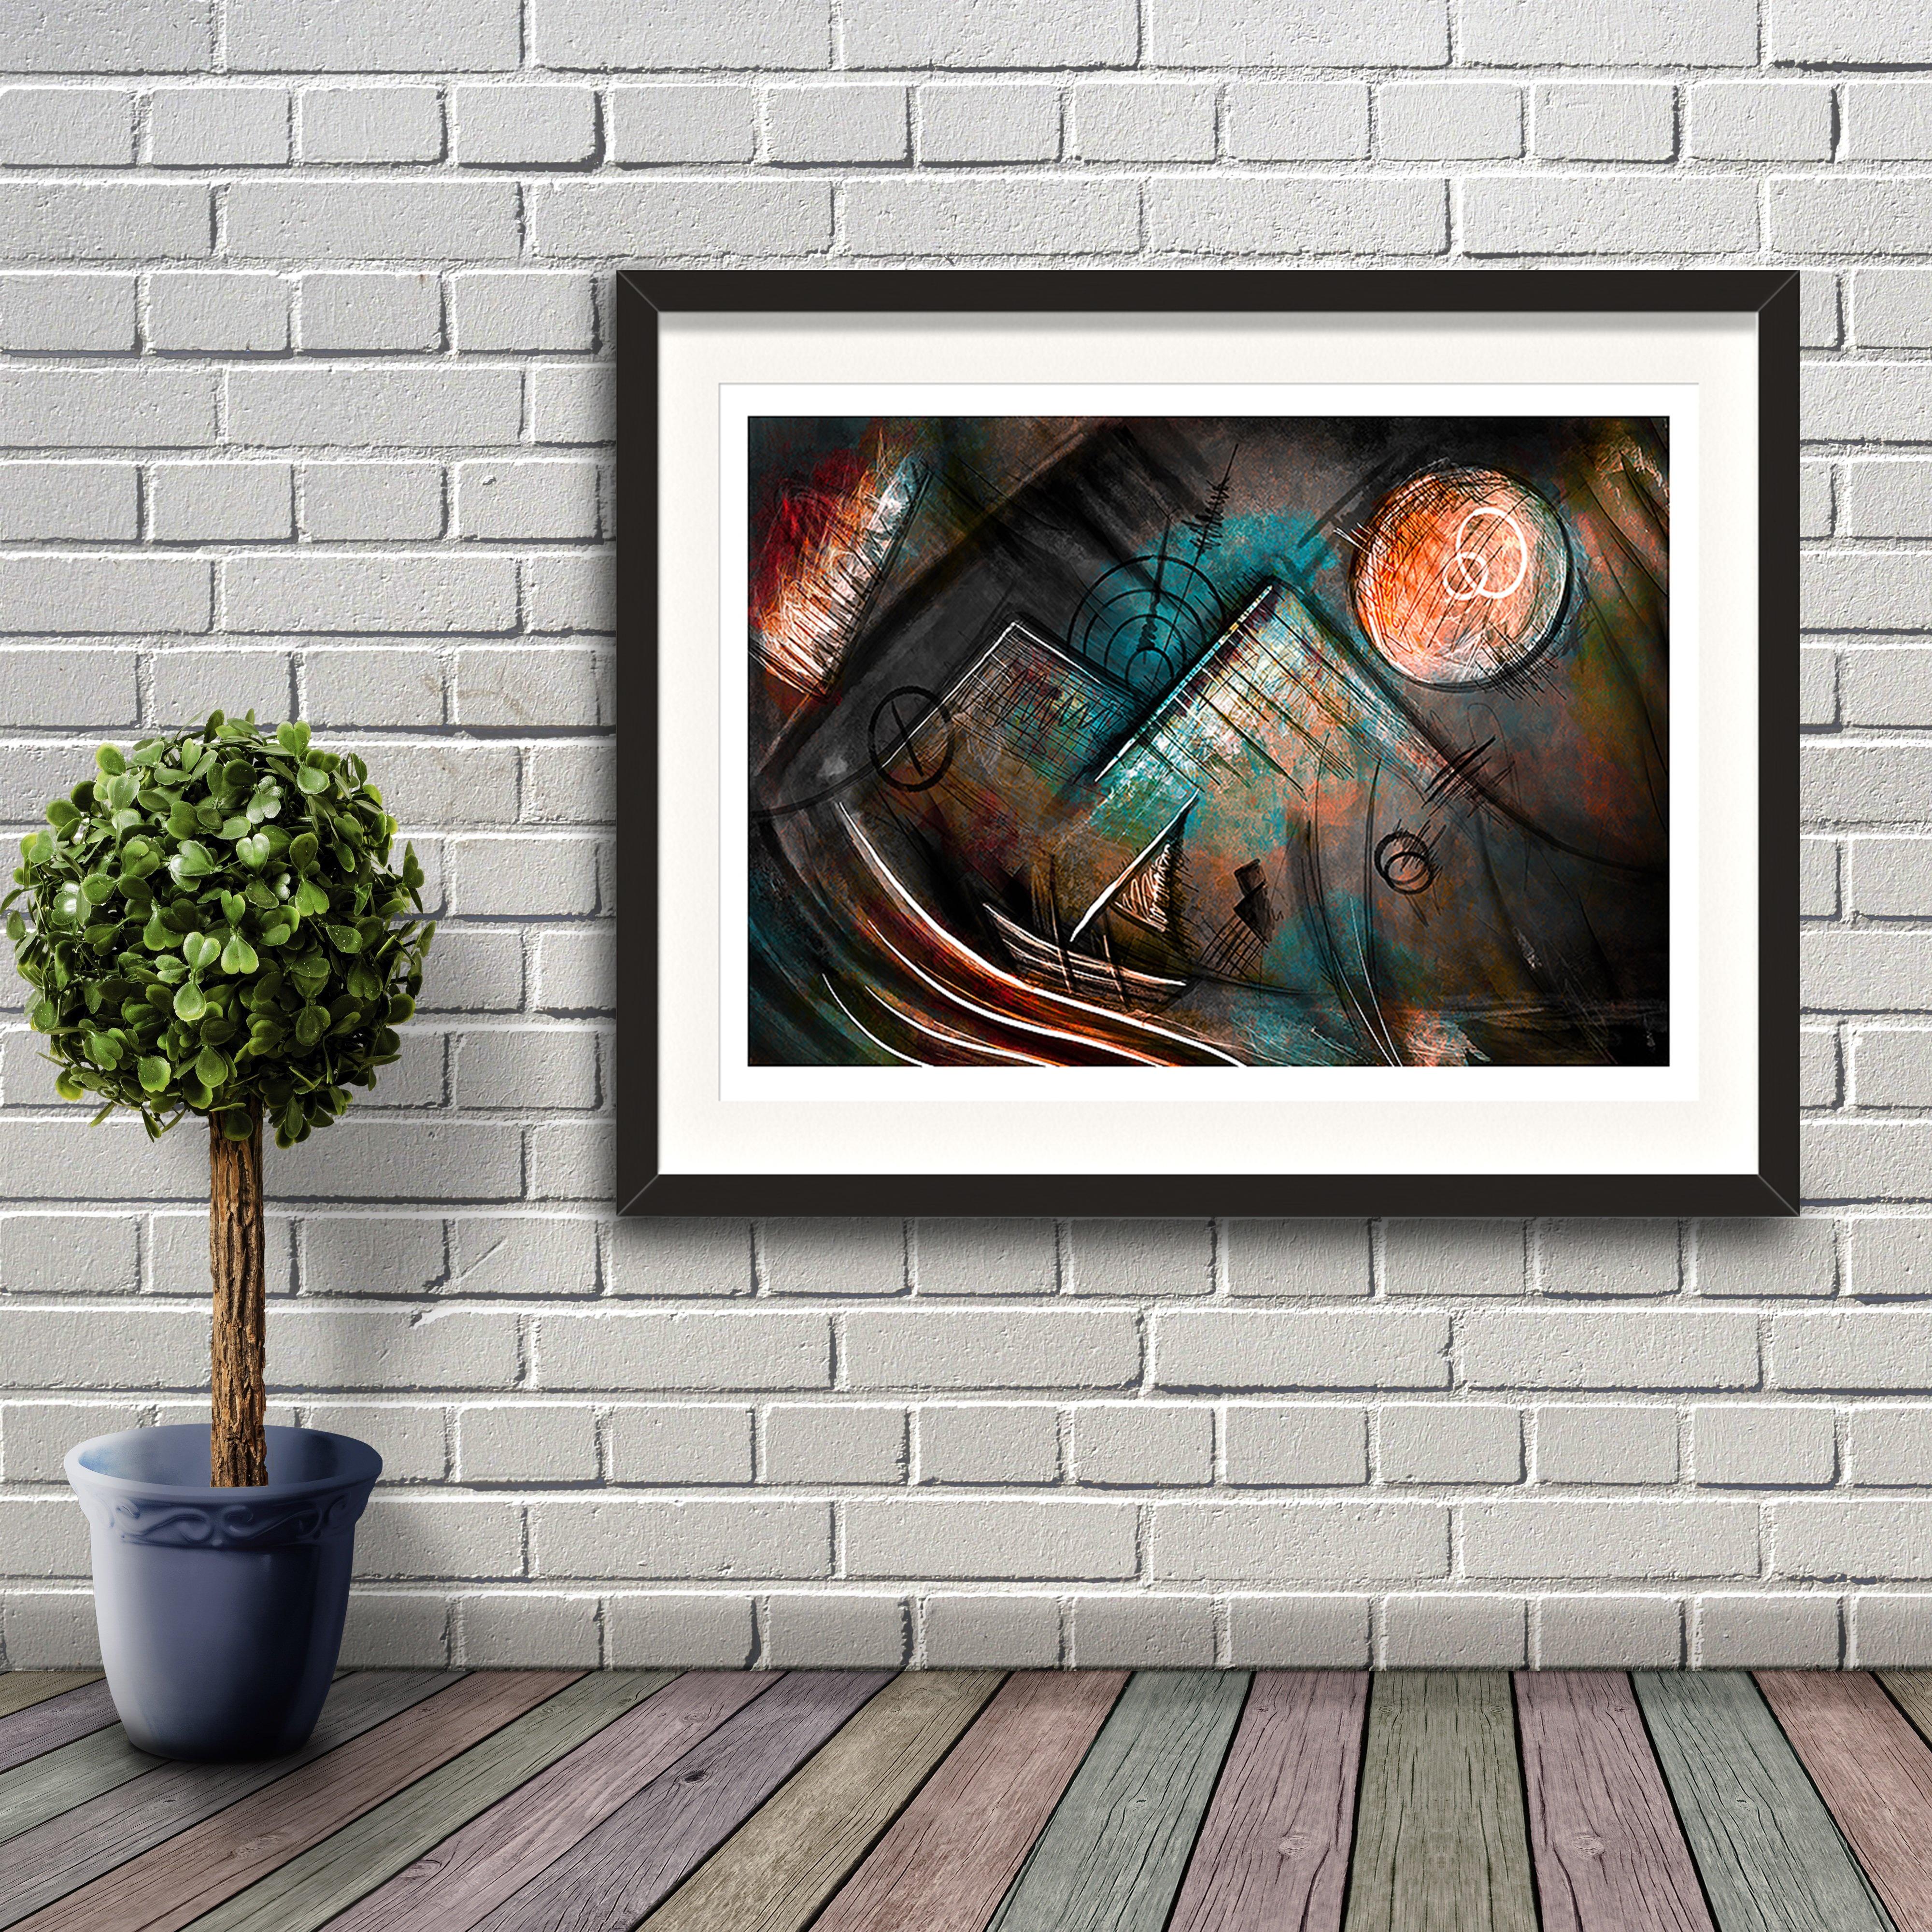 A digital painting called Lost At Mind by Lily Bourne showing an animated abstracrseacape with a ship being tossed about in the waves. Artwork is shown in a black frame hanging on a brick wall.